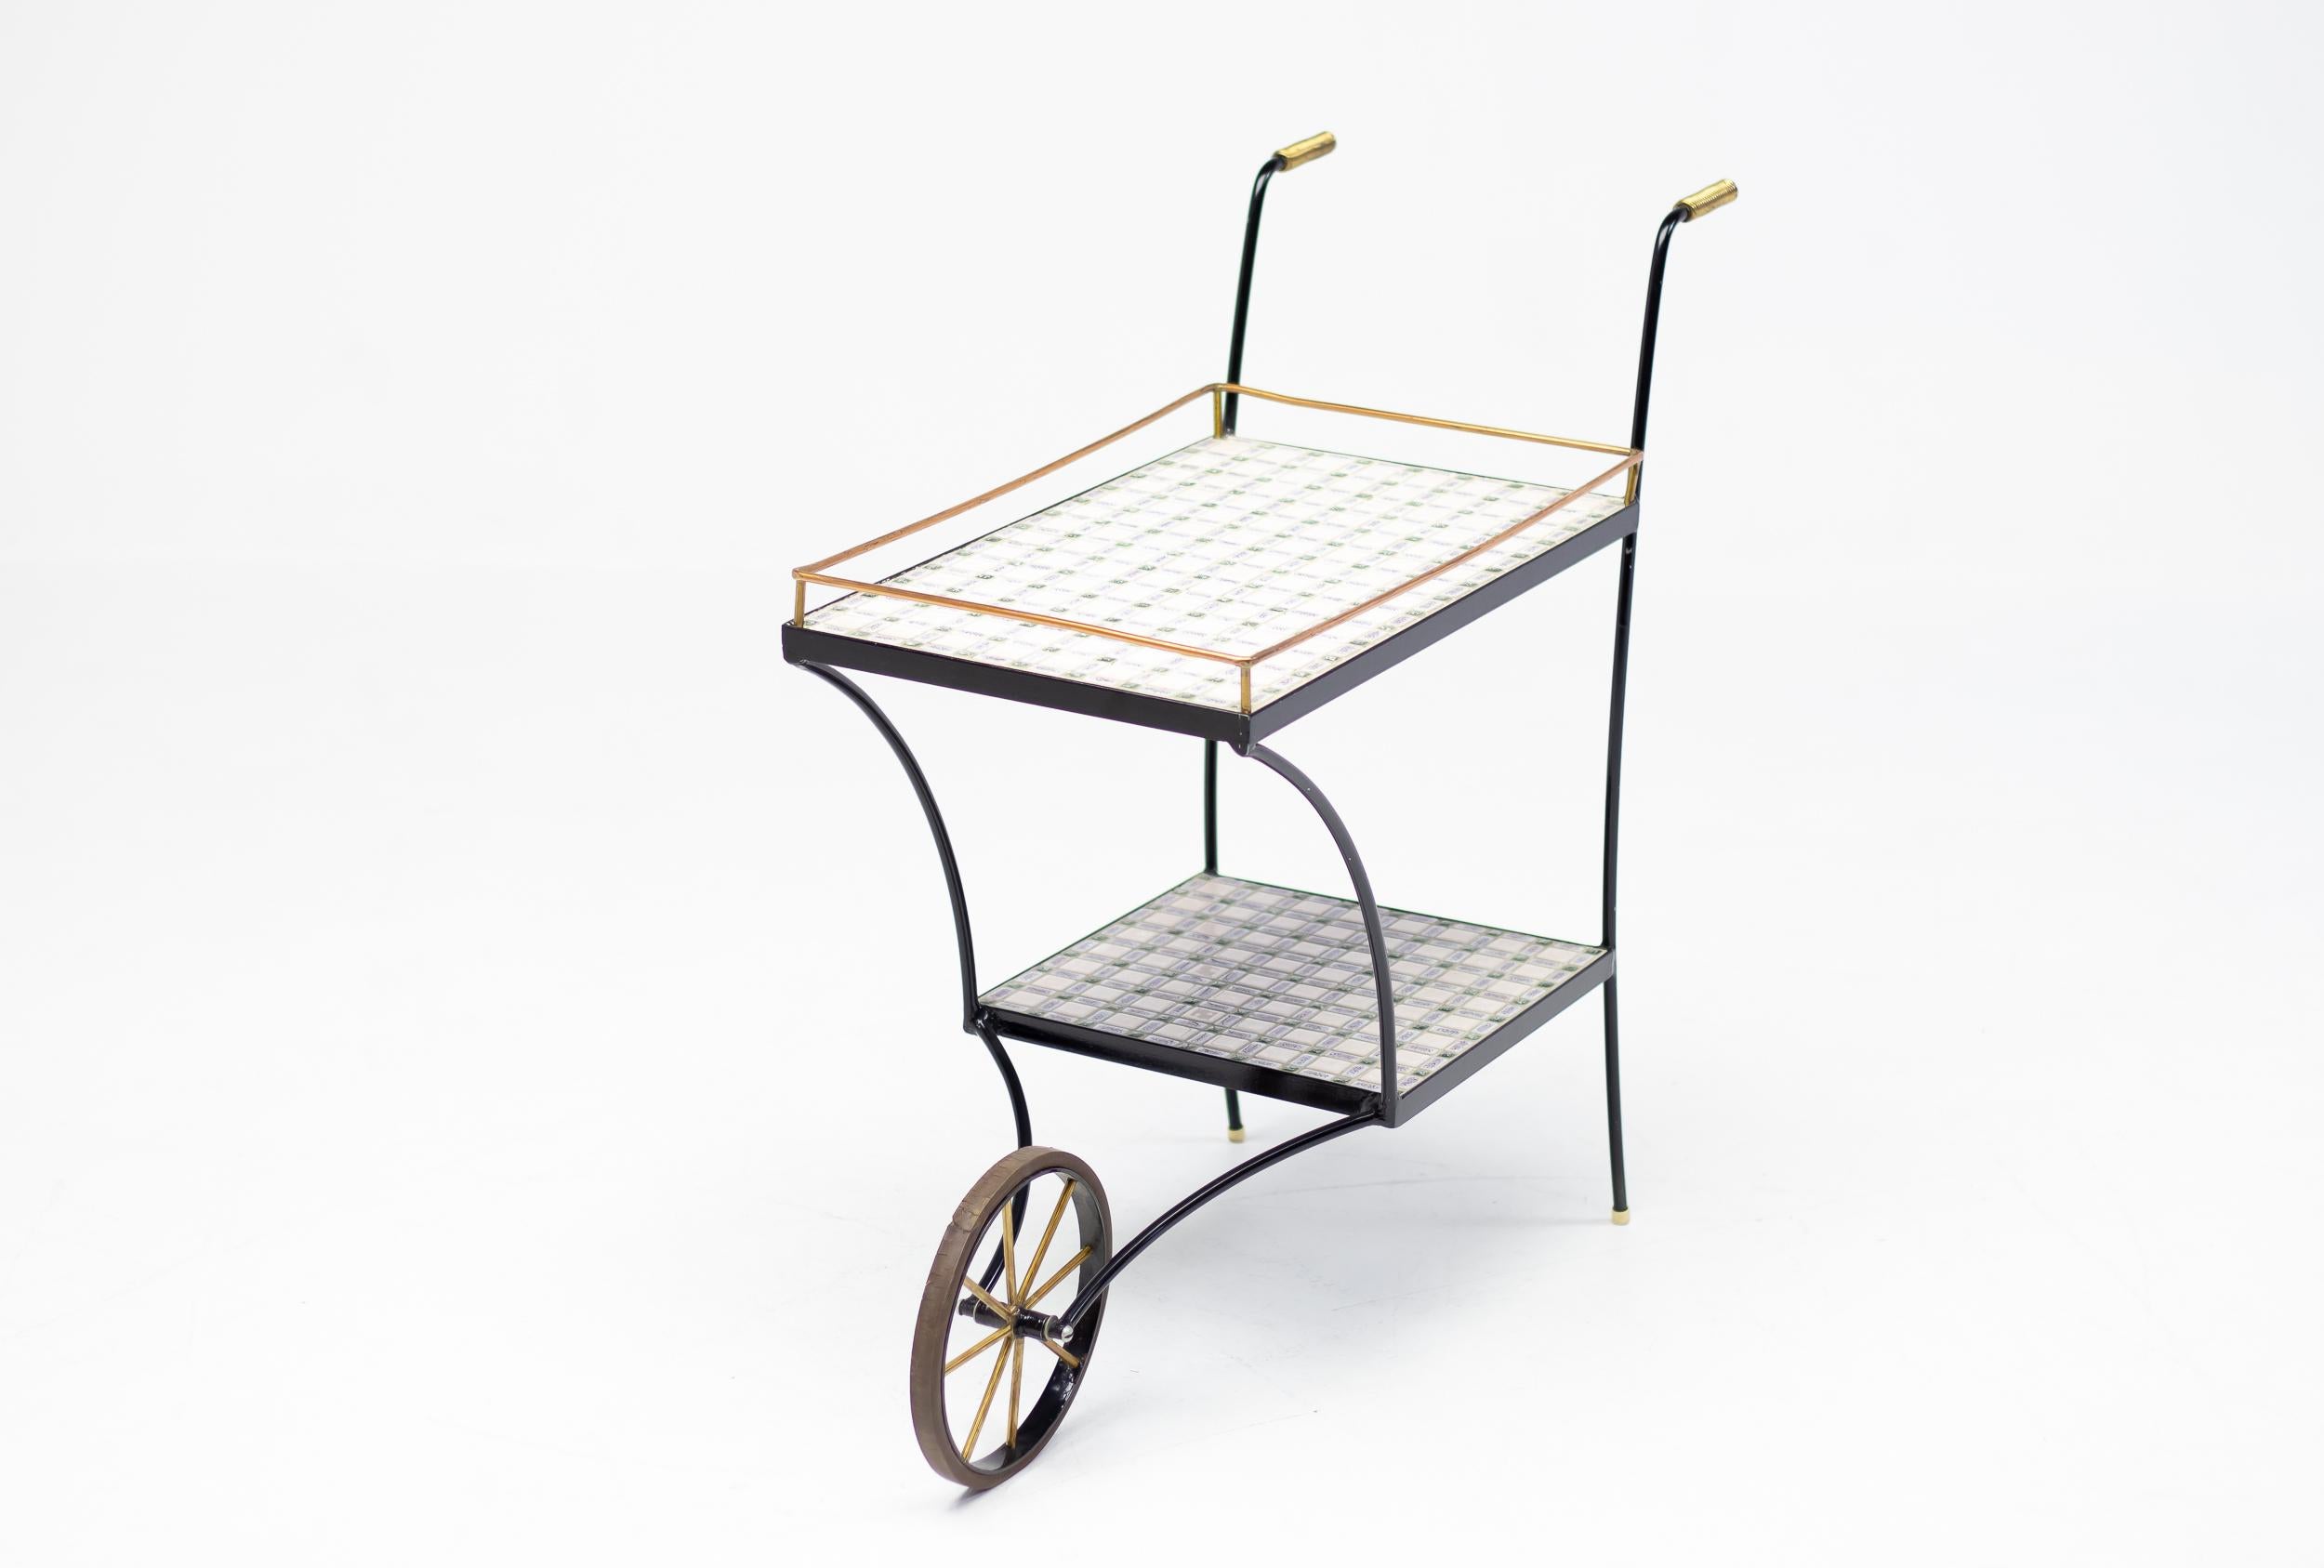 Wonderful Minimalist mid-20th century modern bar cart, made circa 1960 in Italy.
Miniature tiles in different sizes form a beautiful pattern.
Very stable when standing but light and easy to maneuver.
In excellent vintage condition.
Unique piece!